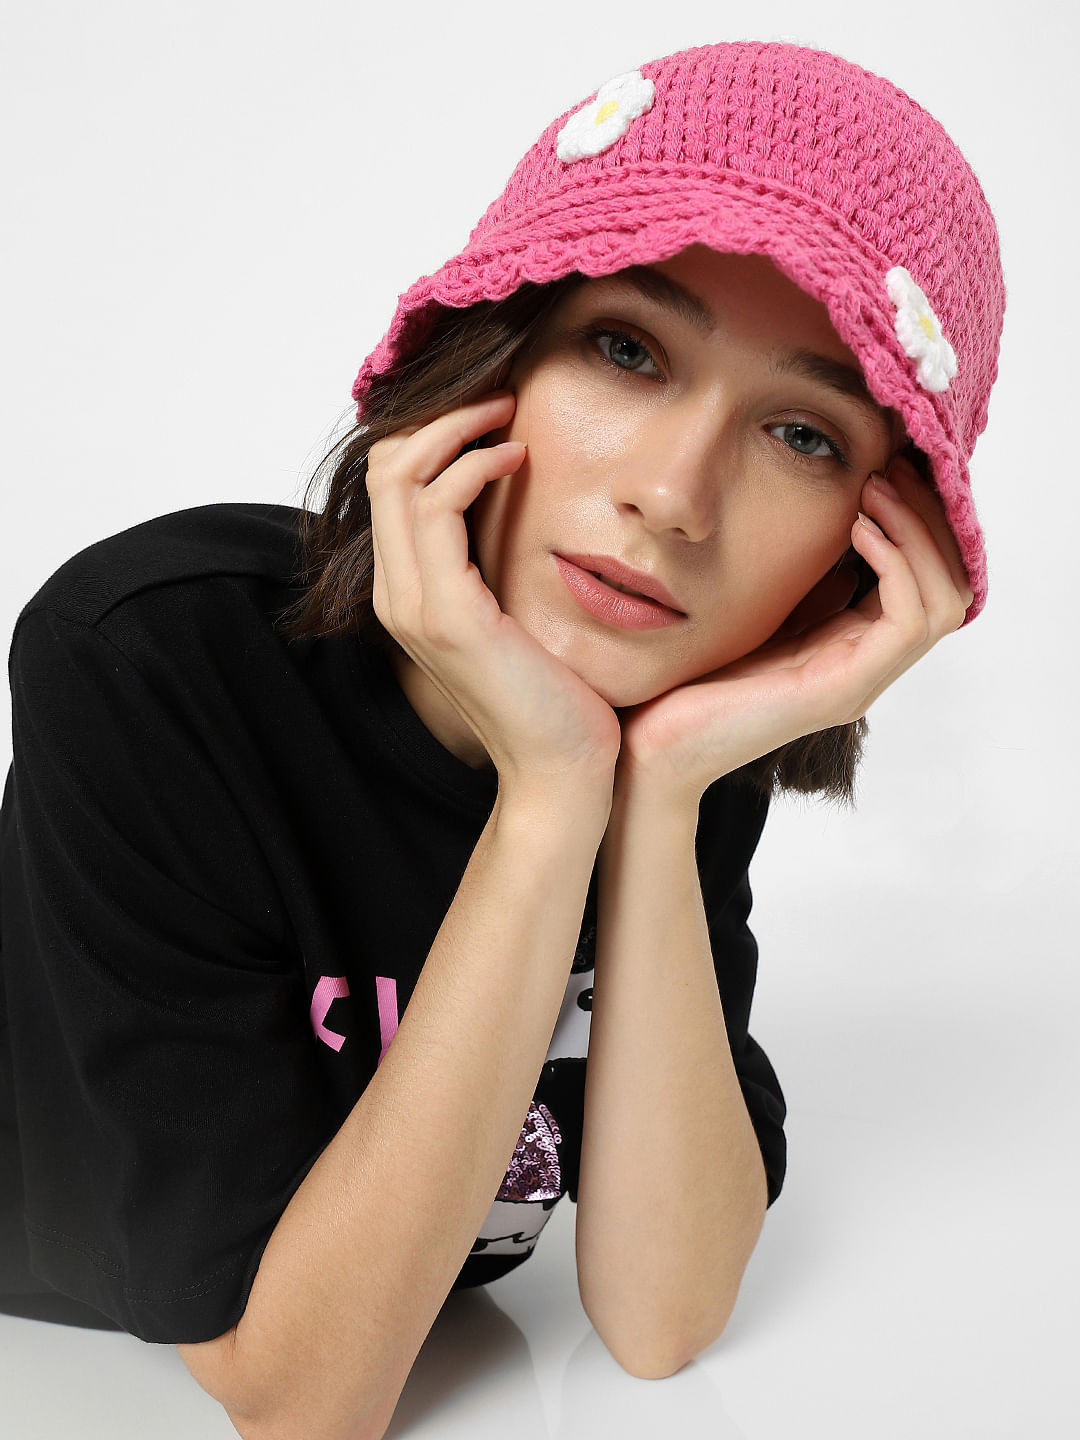 discount 40% Pink S WOMEN FASHION Accessories Hat and cap Pink Stradivarius hat and cap 